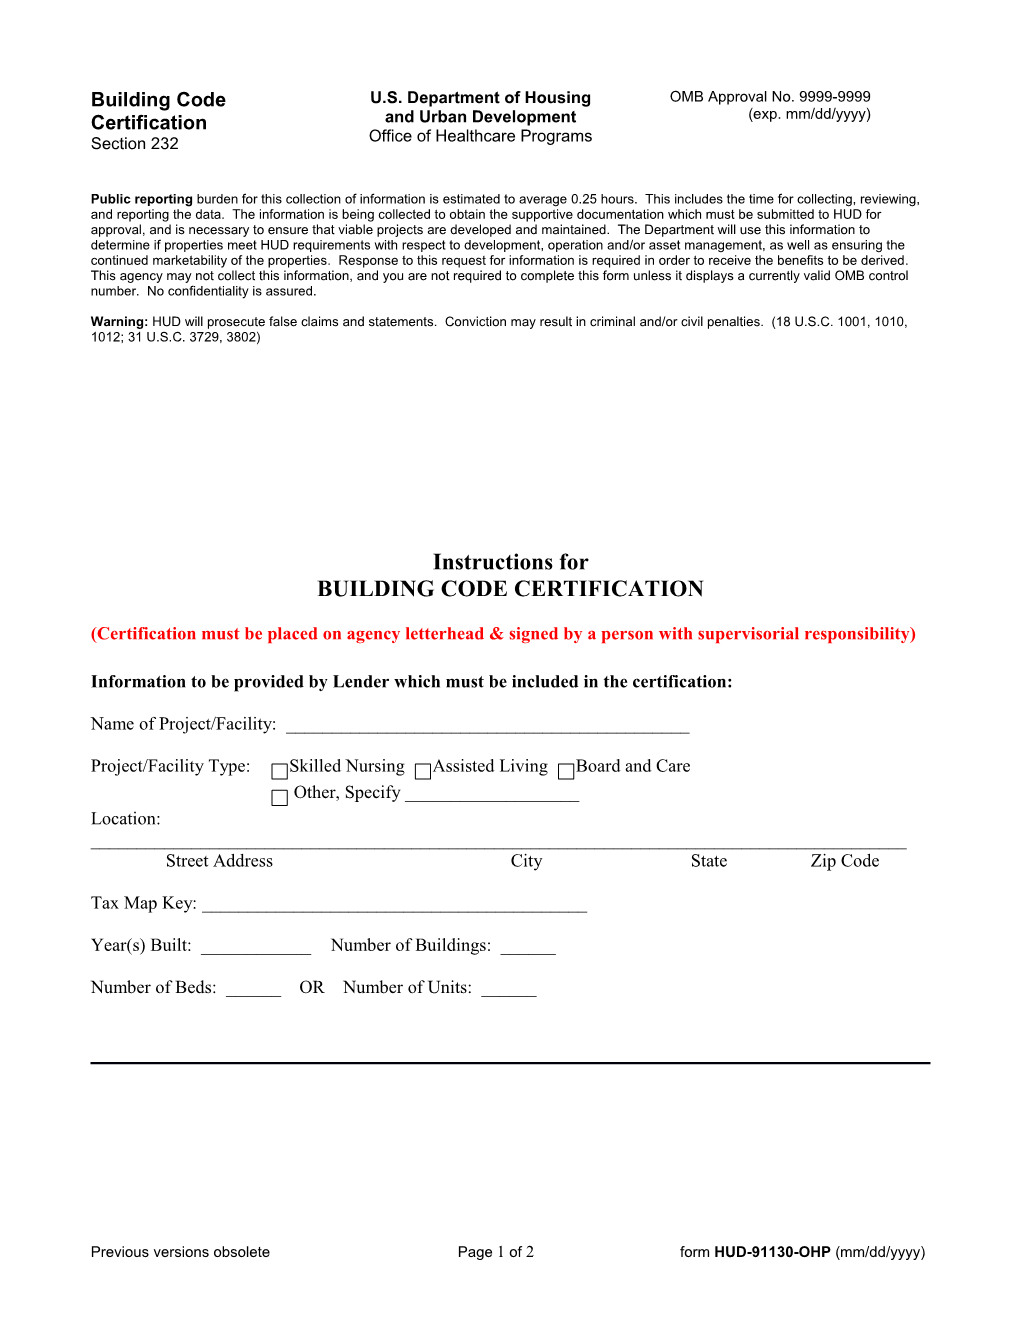 (Certification Must Be Placed on Agency Letterhead Signed by a Person with Supervisorial